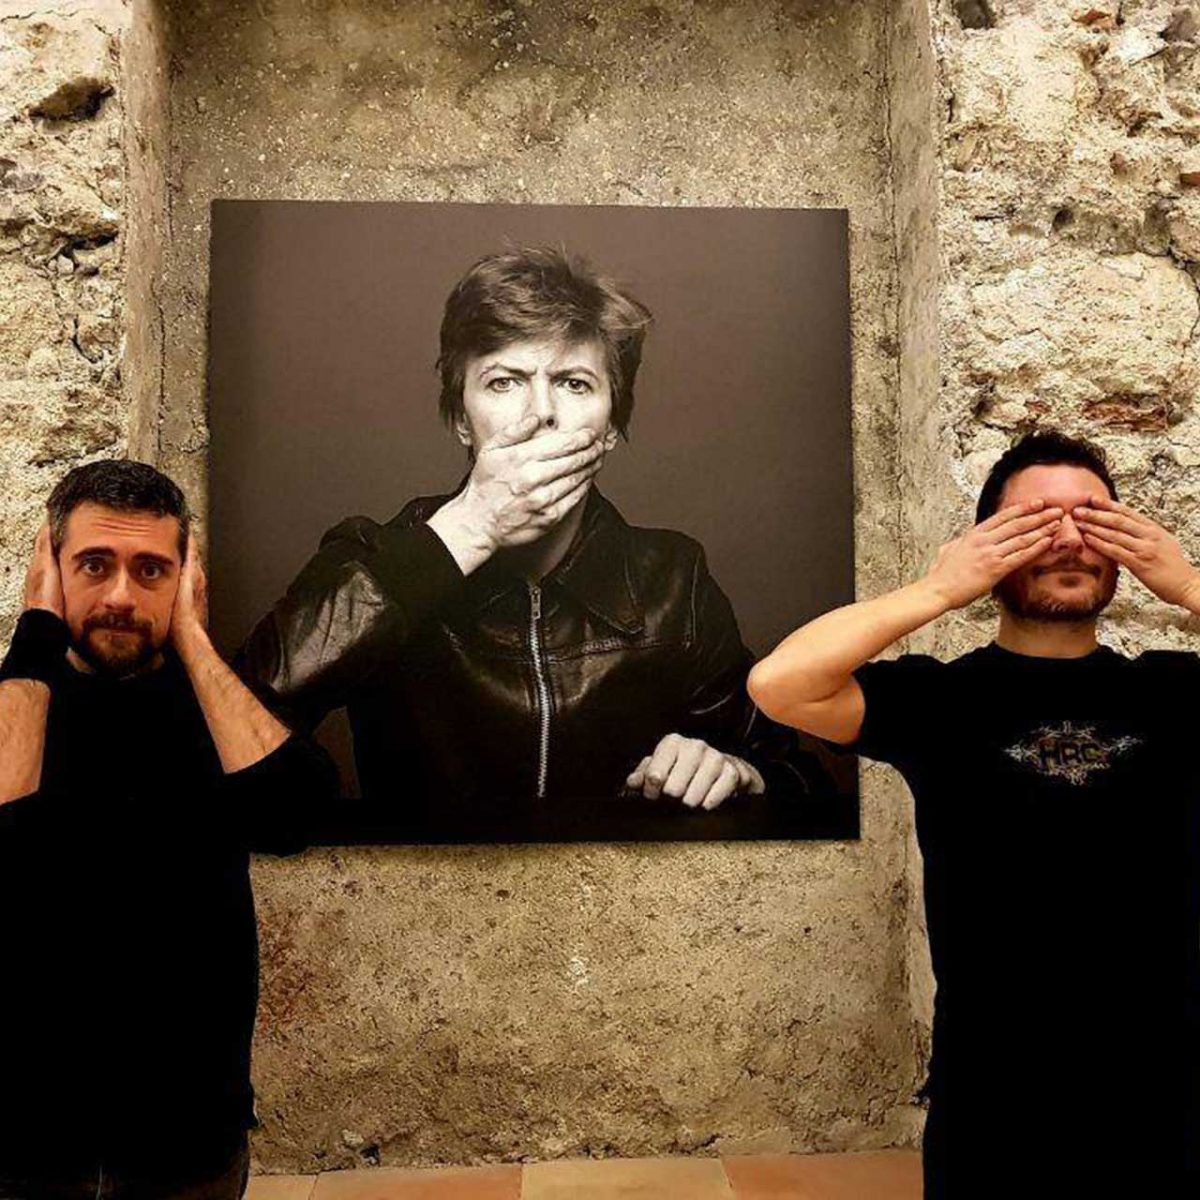 Absolute Beginners David Bowie Experience. Duo acustico Francesco Vilone e Gian Paolo Costantini